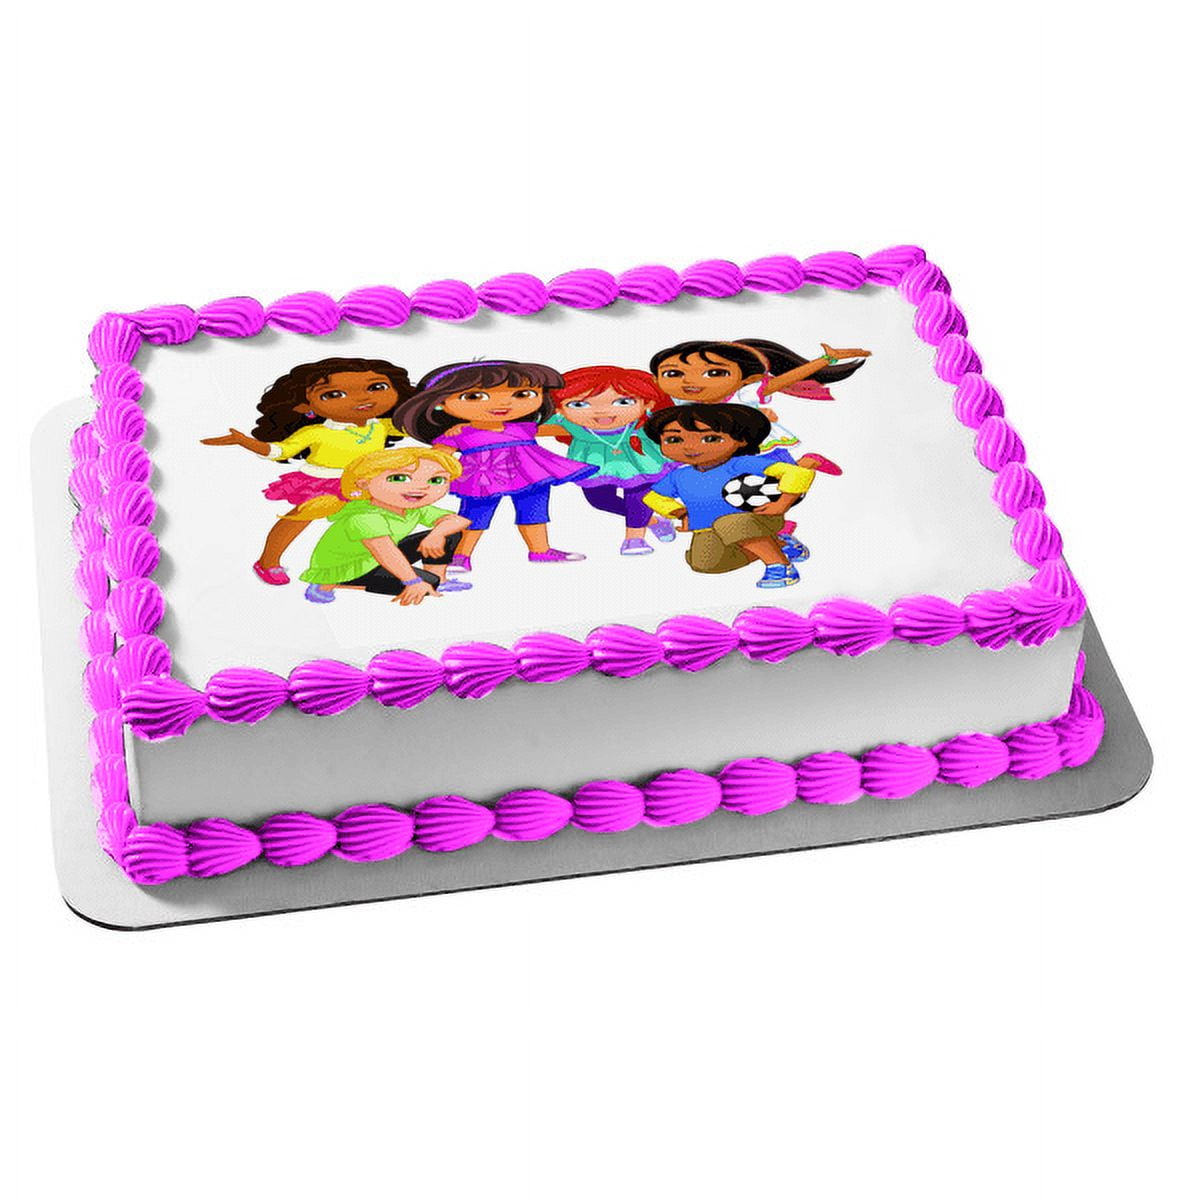 Buy Dora Birthday Cake - Fun and Delicious at Grace Bakery, Nagercoil